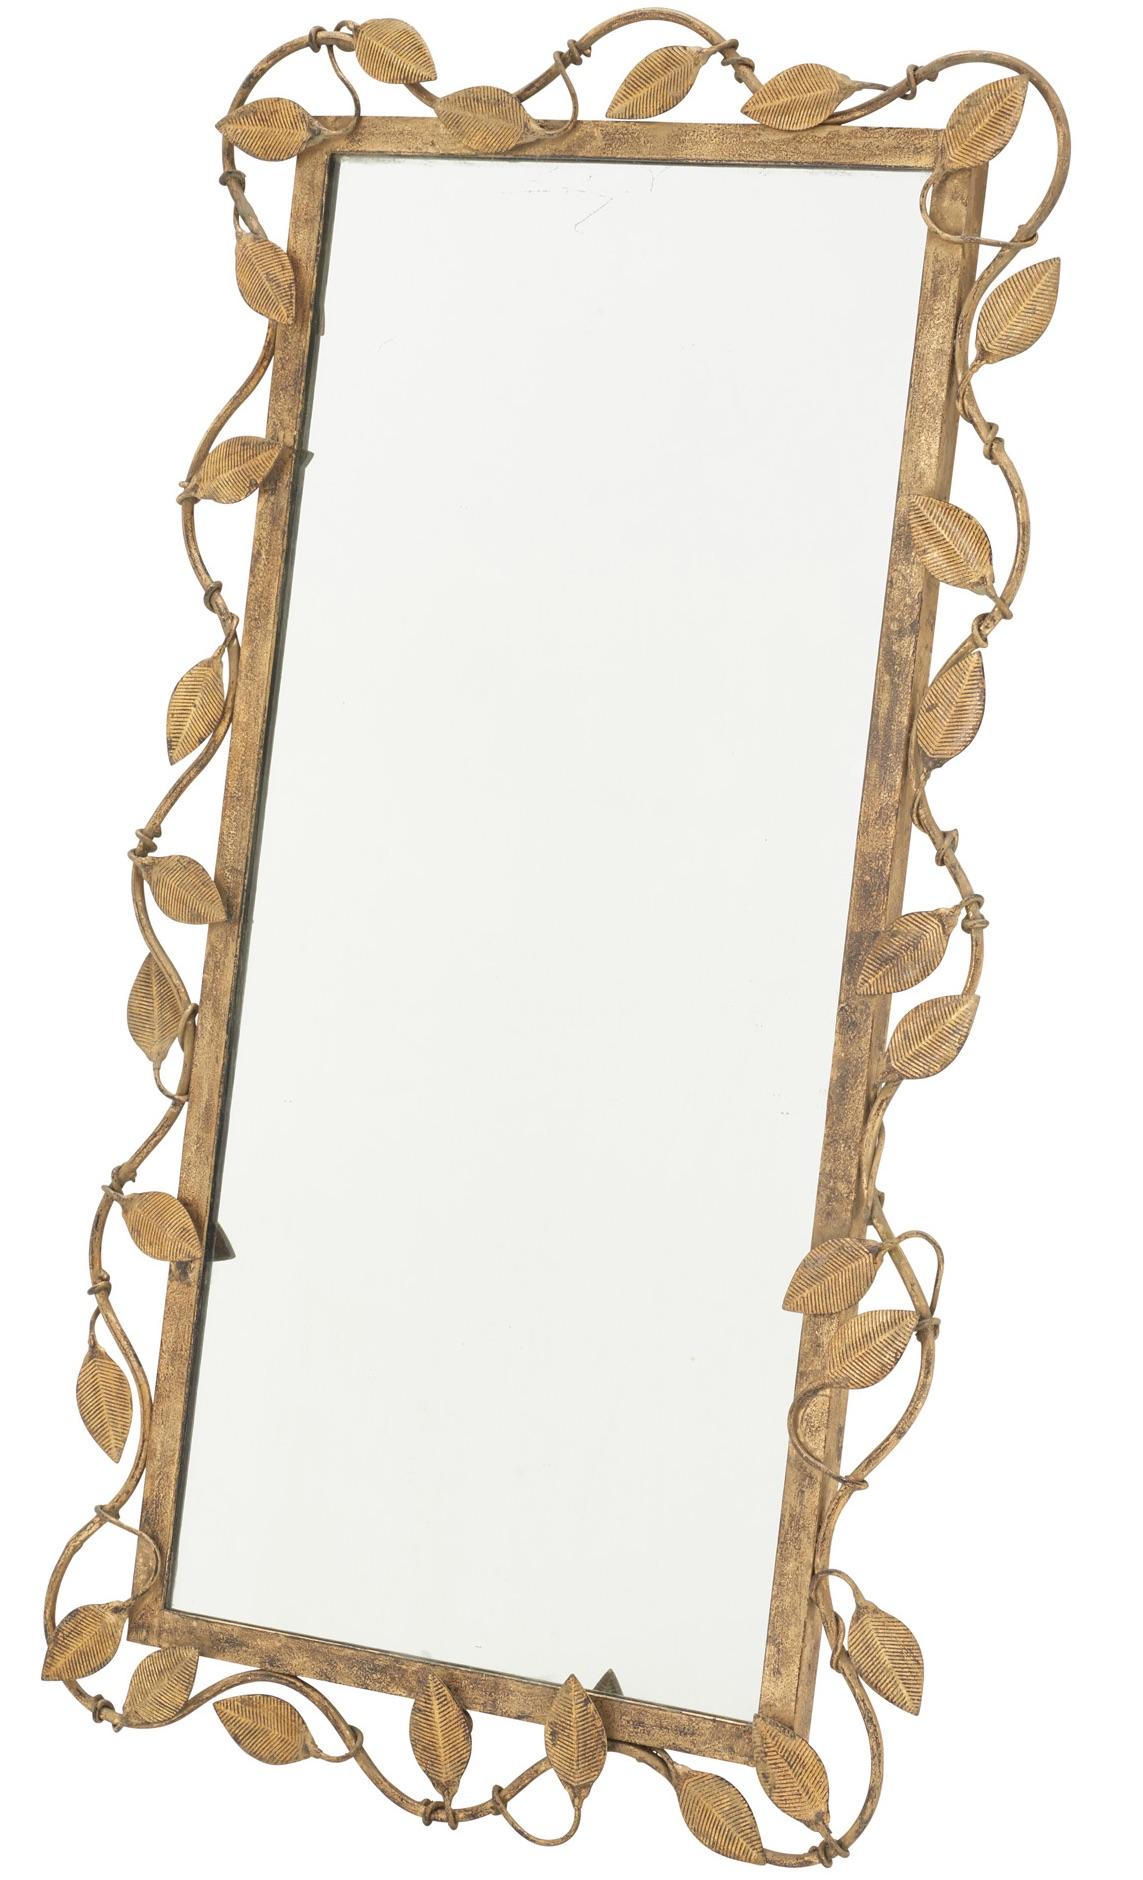 This mid-20th century rectangular brass mirror features beautiful leaf detailing around its edges.

Since Schumacher was founded in 1889, our family-owned company has been synonymous with style, taste, and innovation. A passion for luxury and an